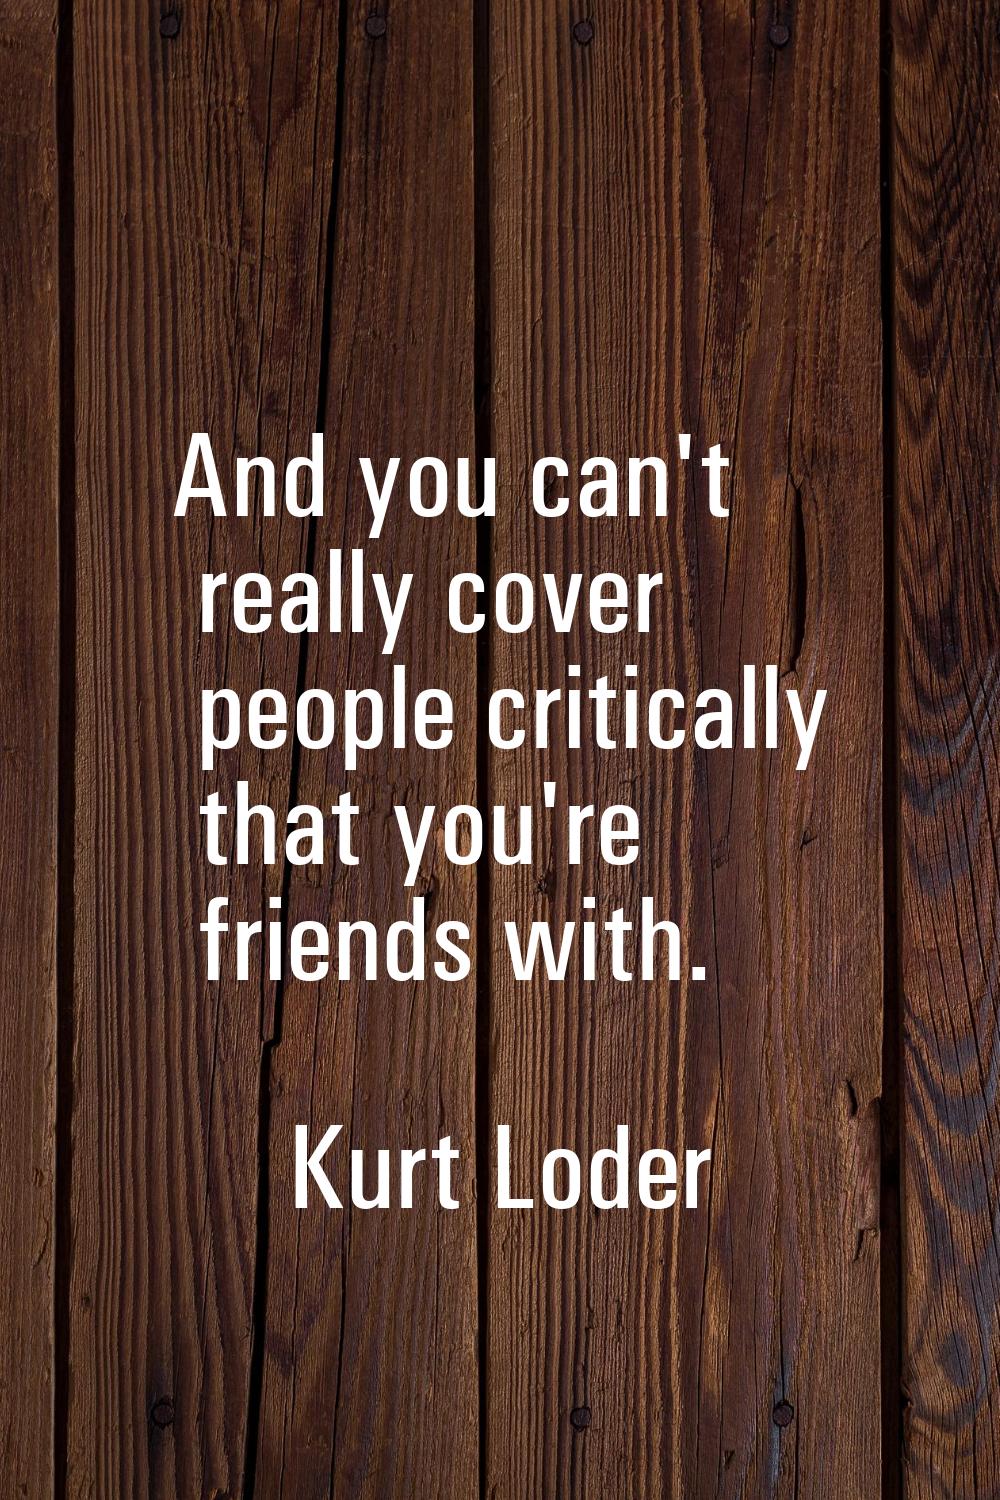 And you can't really cover people critically that you're friends with.